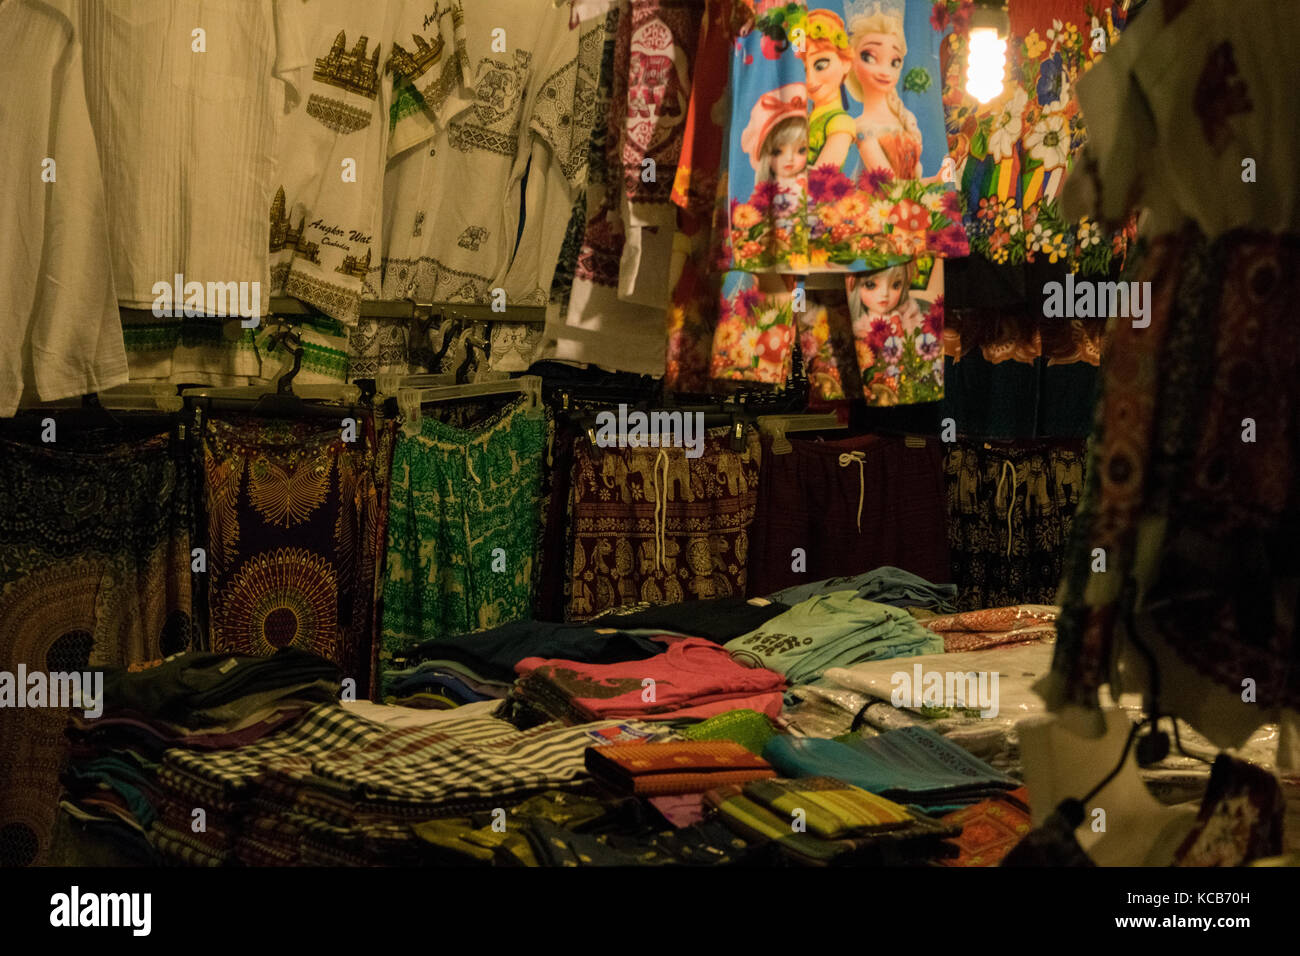 A clothes stall at the Phnom Penh night market. Women clothes with different colours and ethnic patterns. Cheap prices. Cambodia, South East Asia Stock Photo